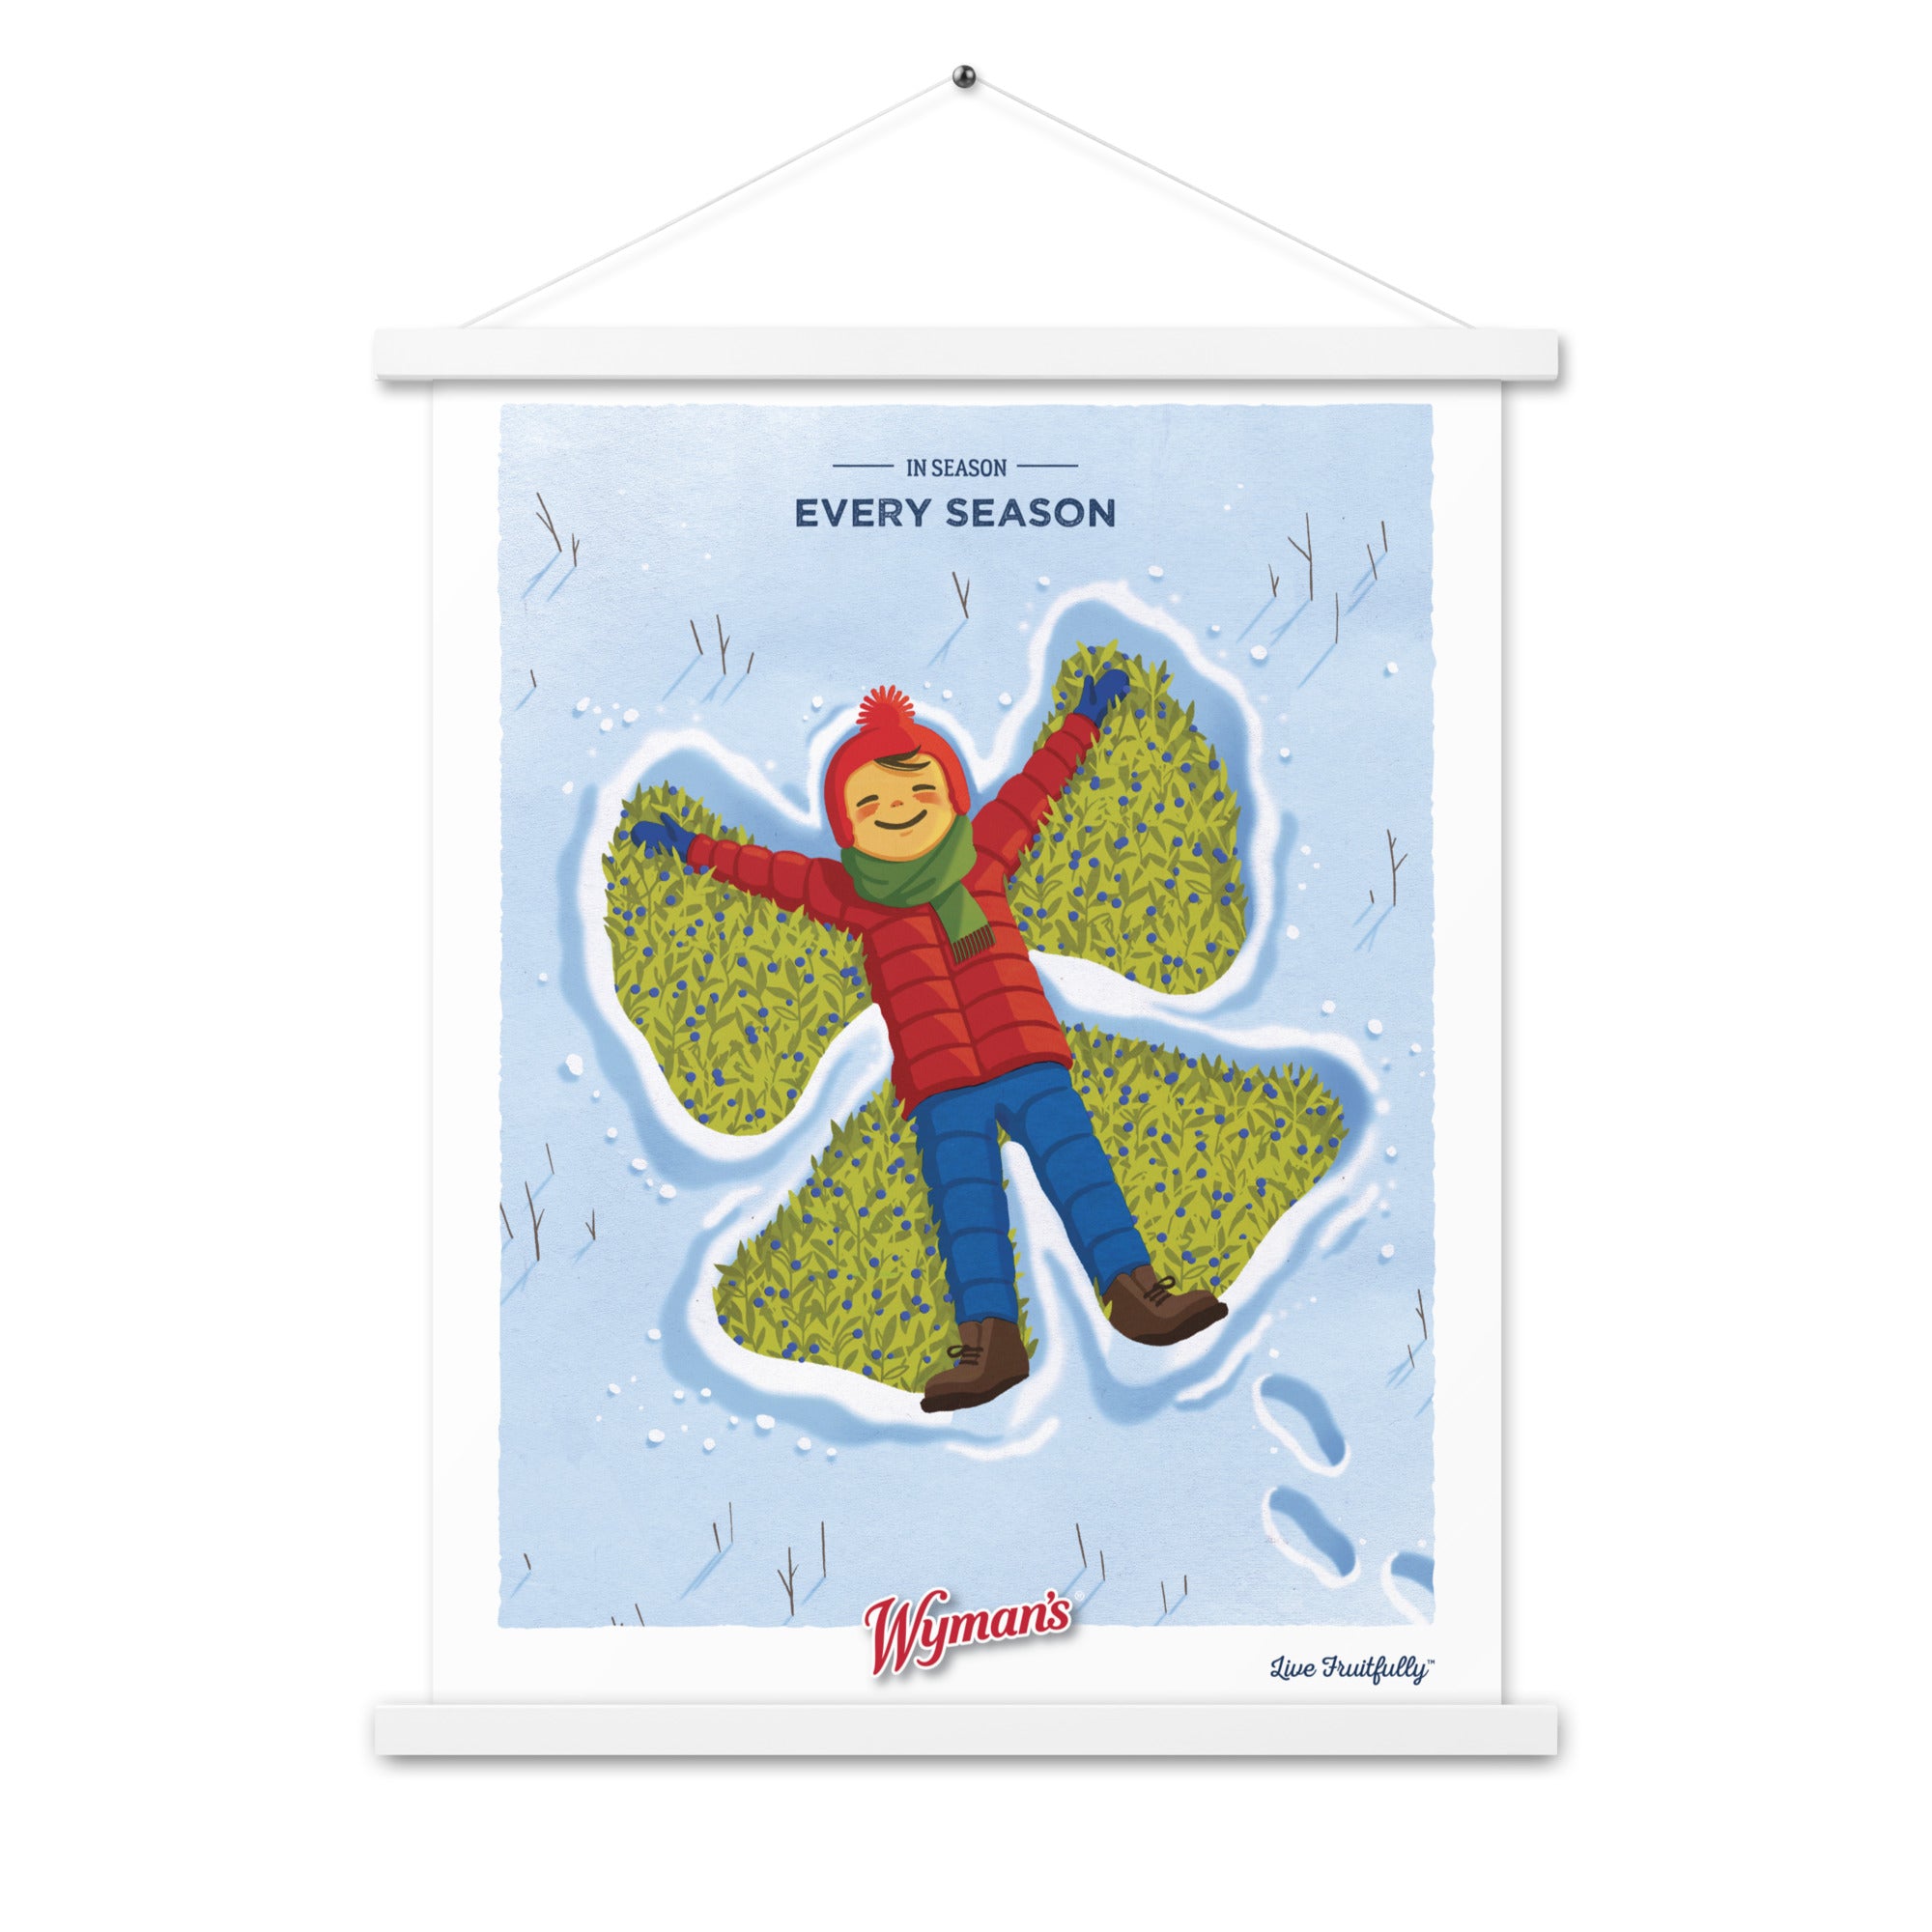 A custom design In Season, Every Season Poster from Shop Wyman's with a picture of a boy in the snow.